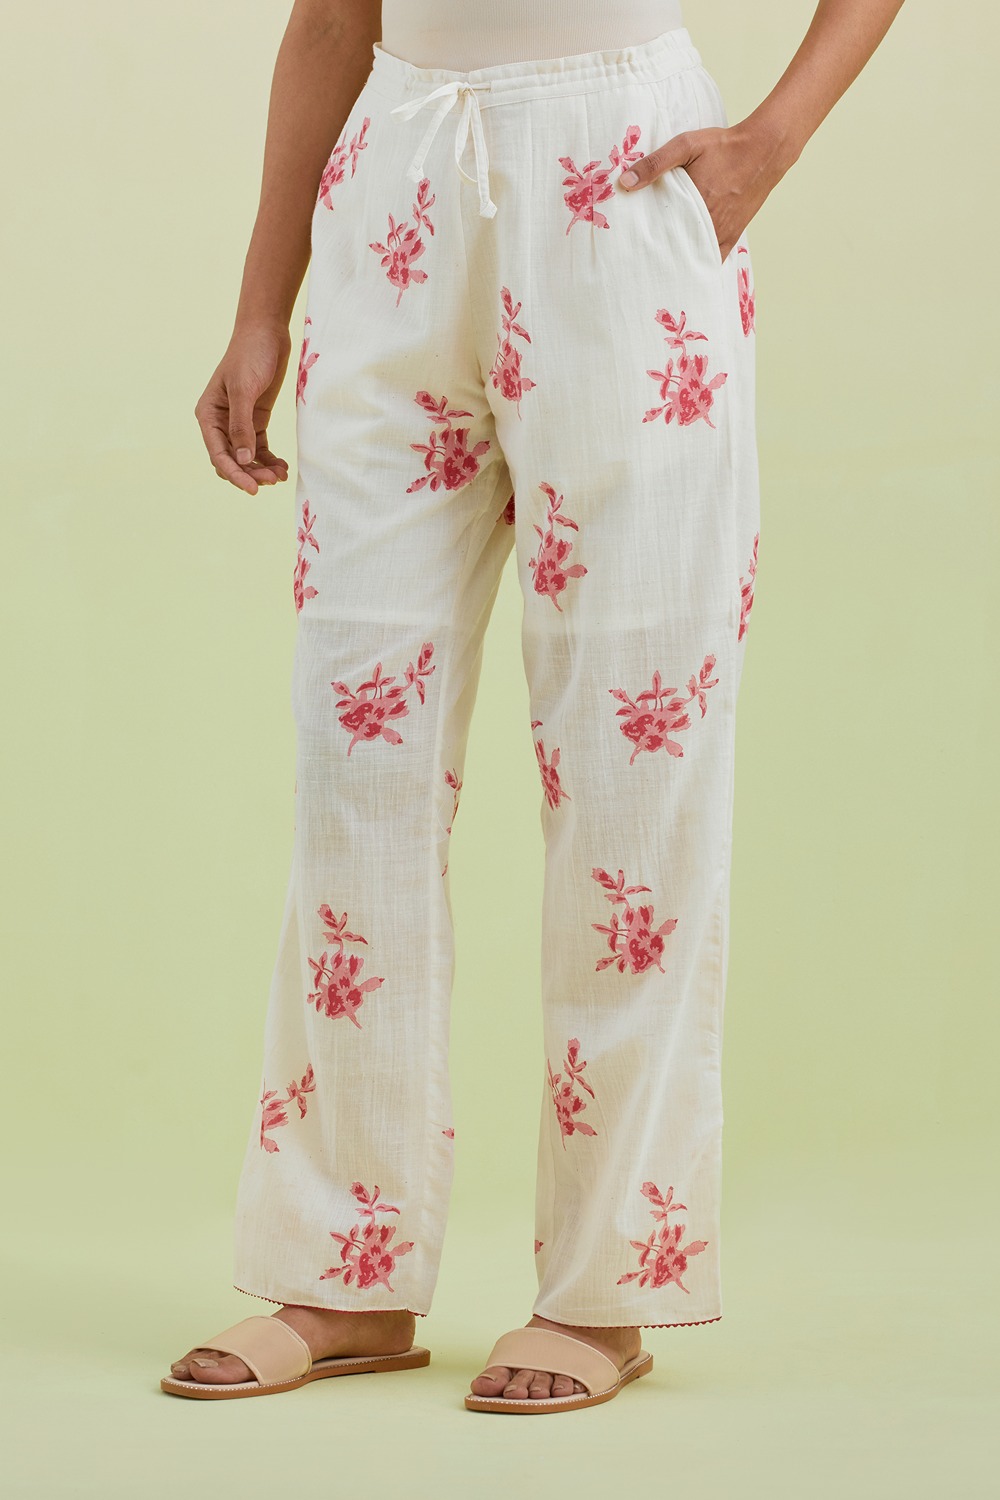 Off White Straight Pants With All-Over Pink Colored Floral Boota Hand-Block Print